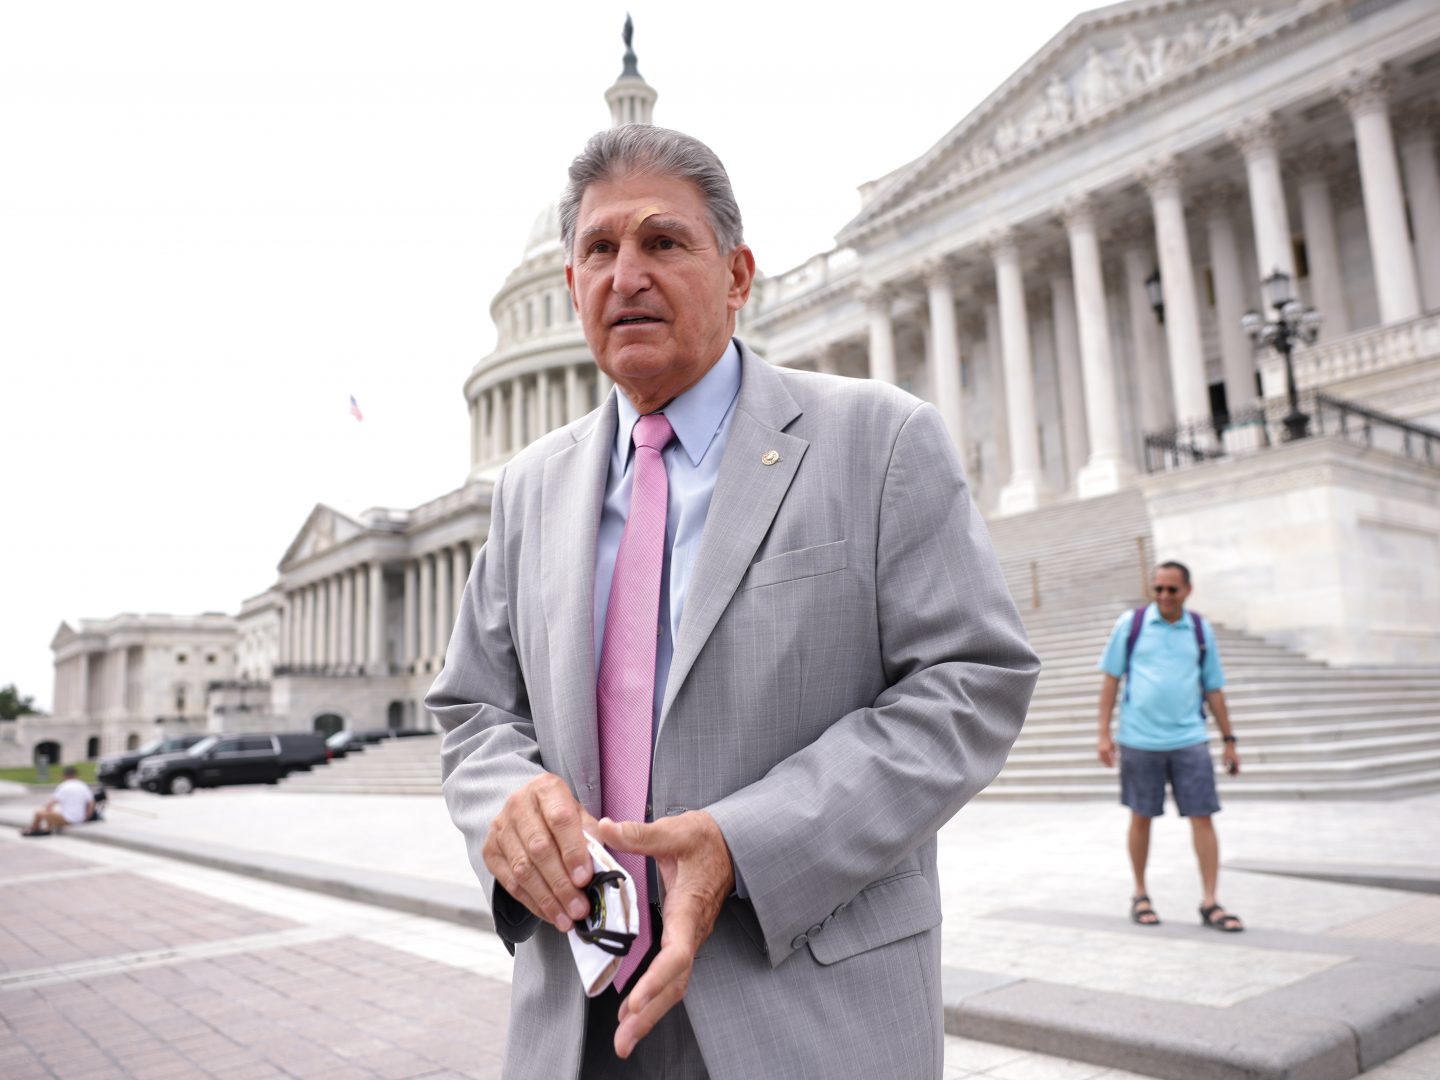 Moderate Sen. Joe Manchin of West Virginia is already raising concerns about the size of the Democrats' $3.5 trillion budget resolution, indicating he may want to rethink what type of package is needed as the economy deals with inflation.